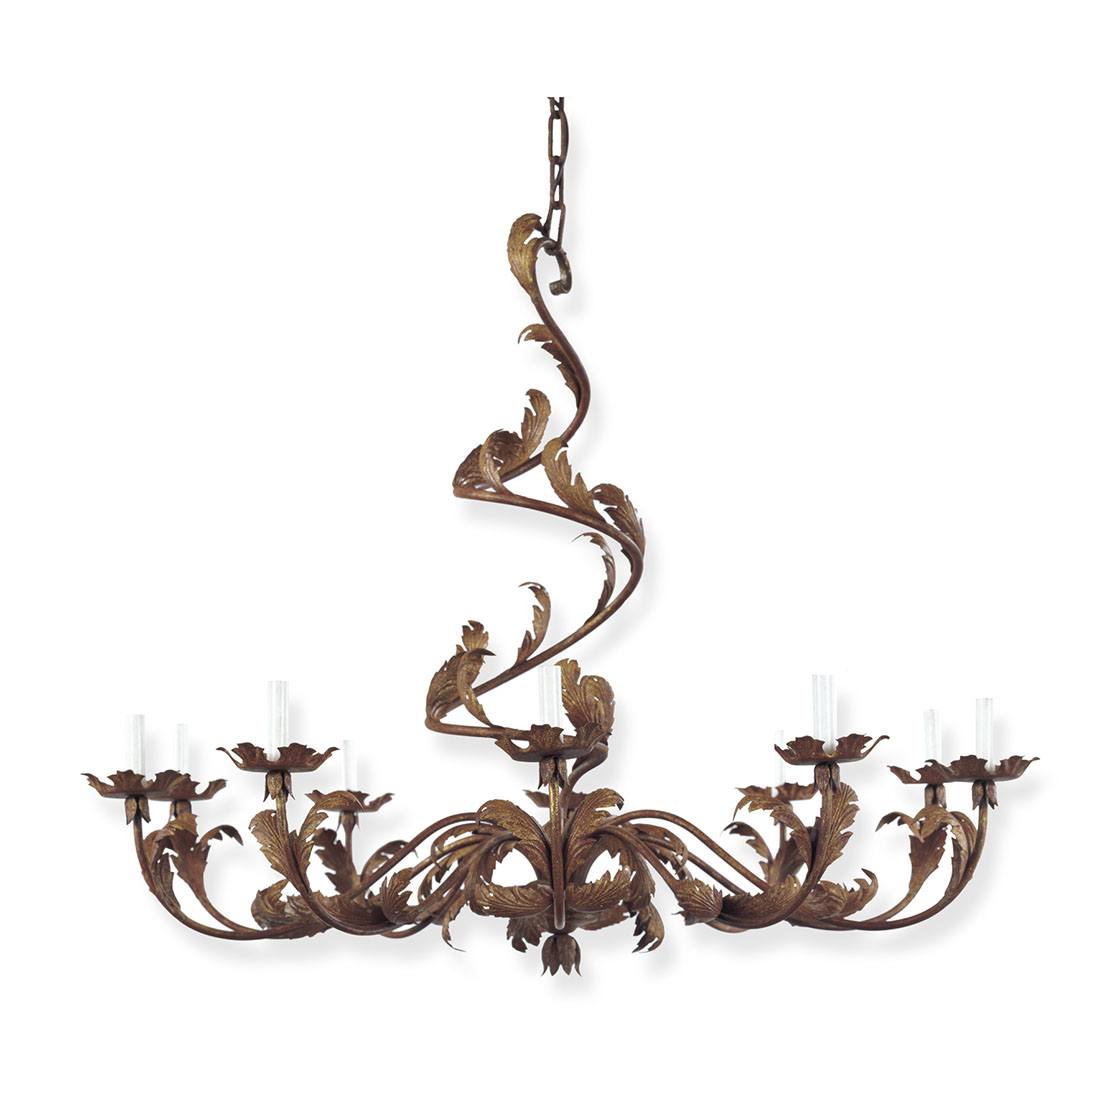 Borghese chandelier in Wrought iron - Beaumont & Fletcher